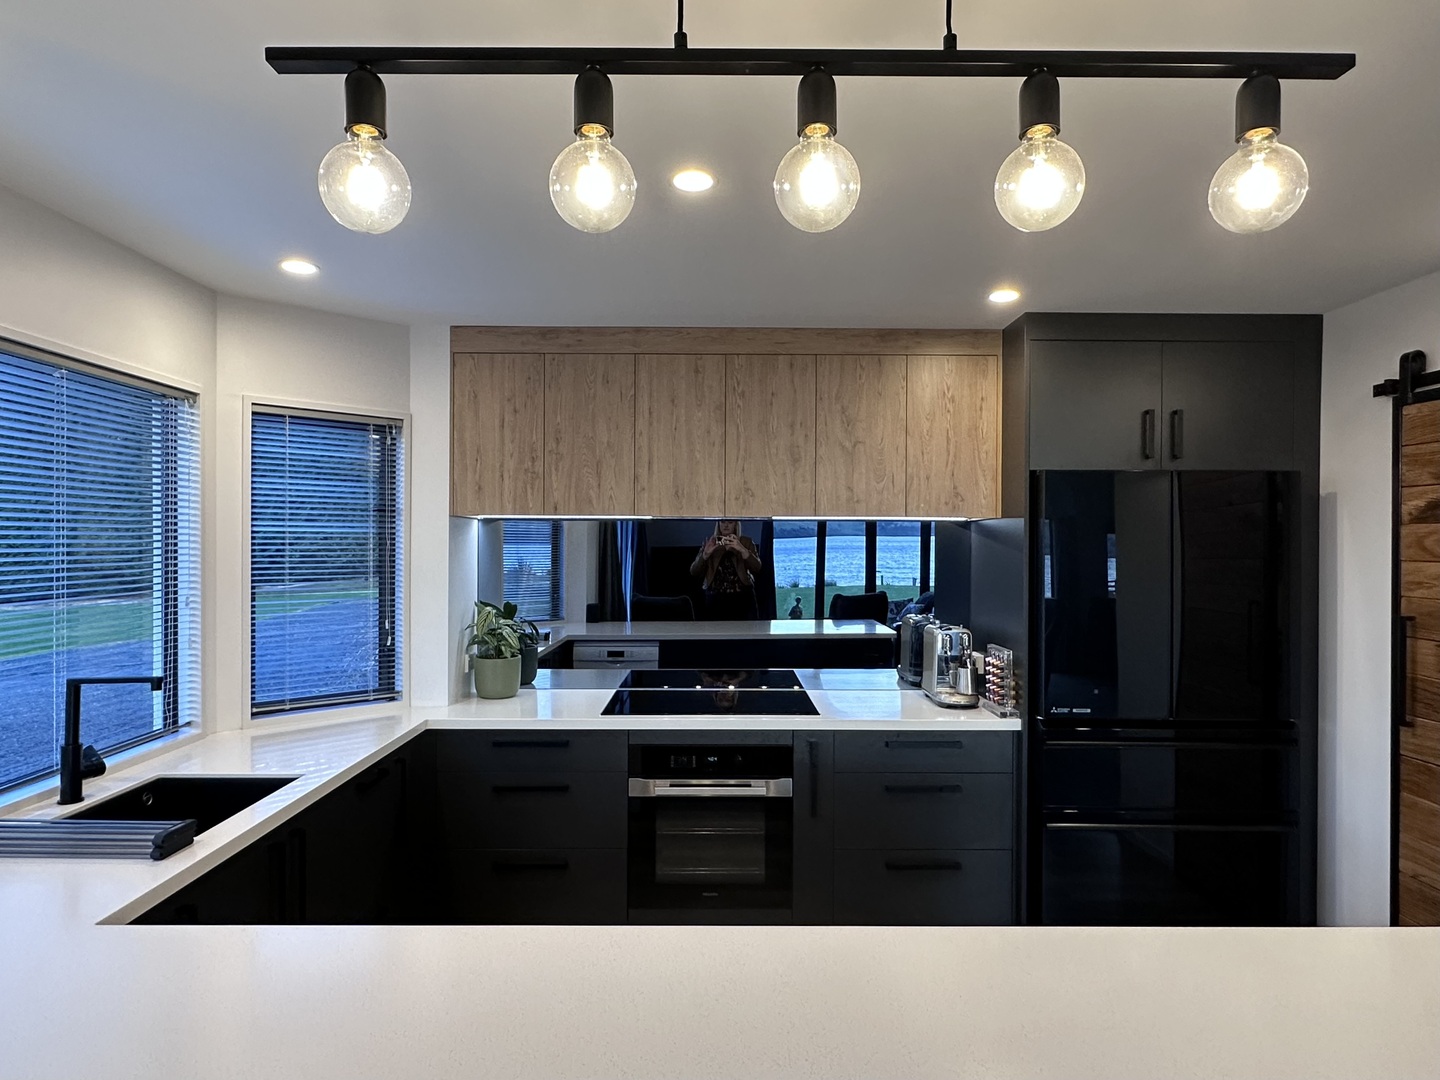 kitchens with beautiful pendant lights and led strips